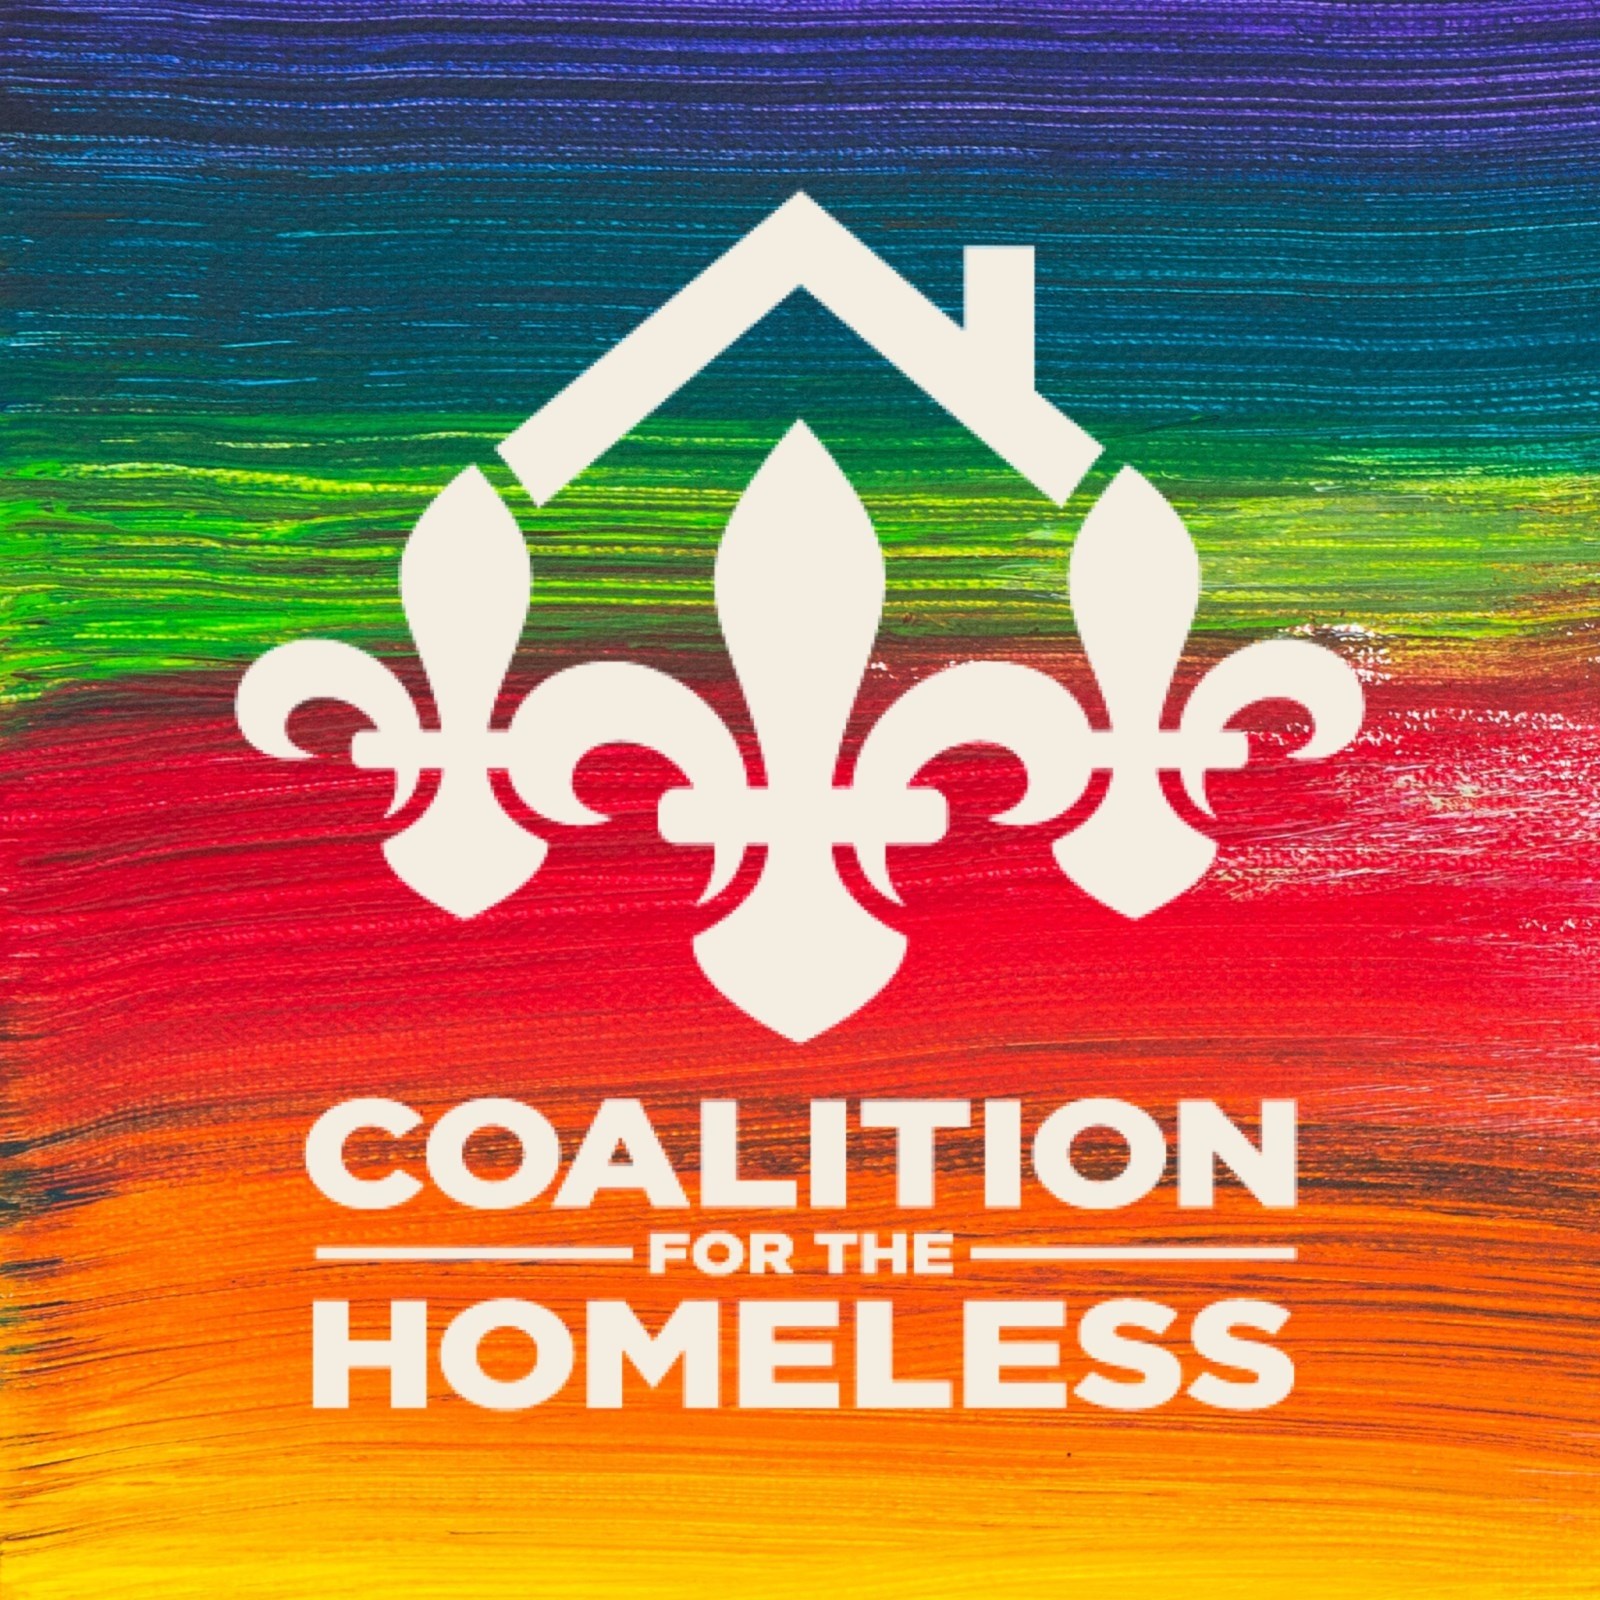 The Coalition for the Homeless